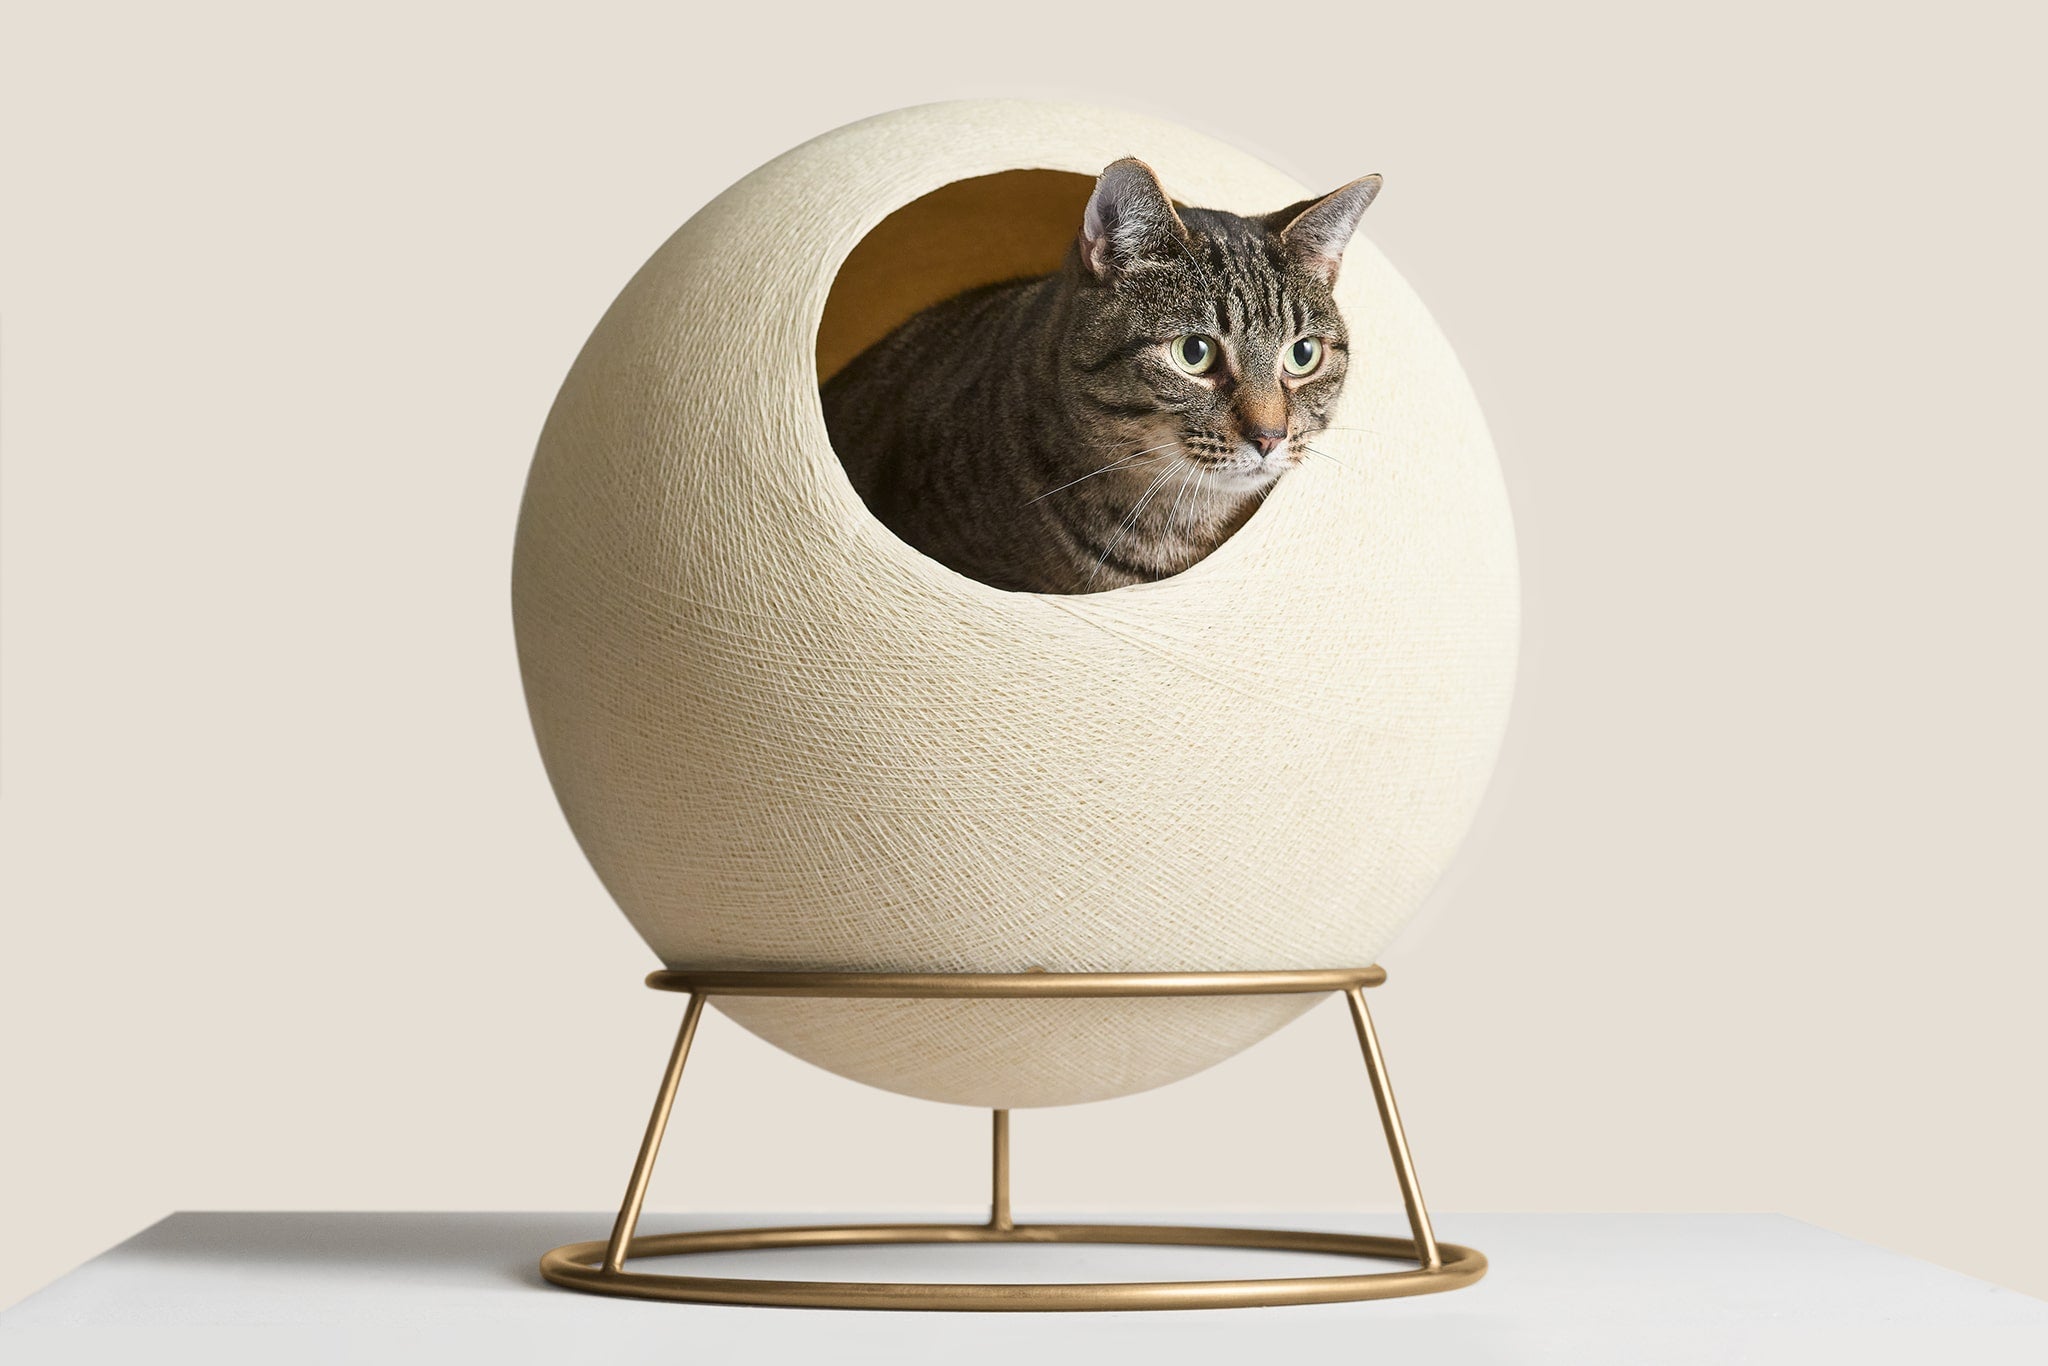 gray cat inside a spherical cat bed with a gold stand